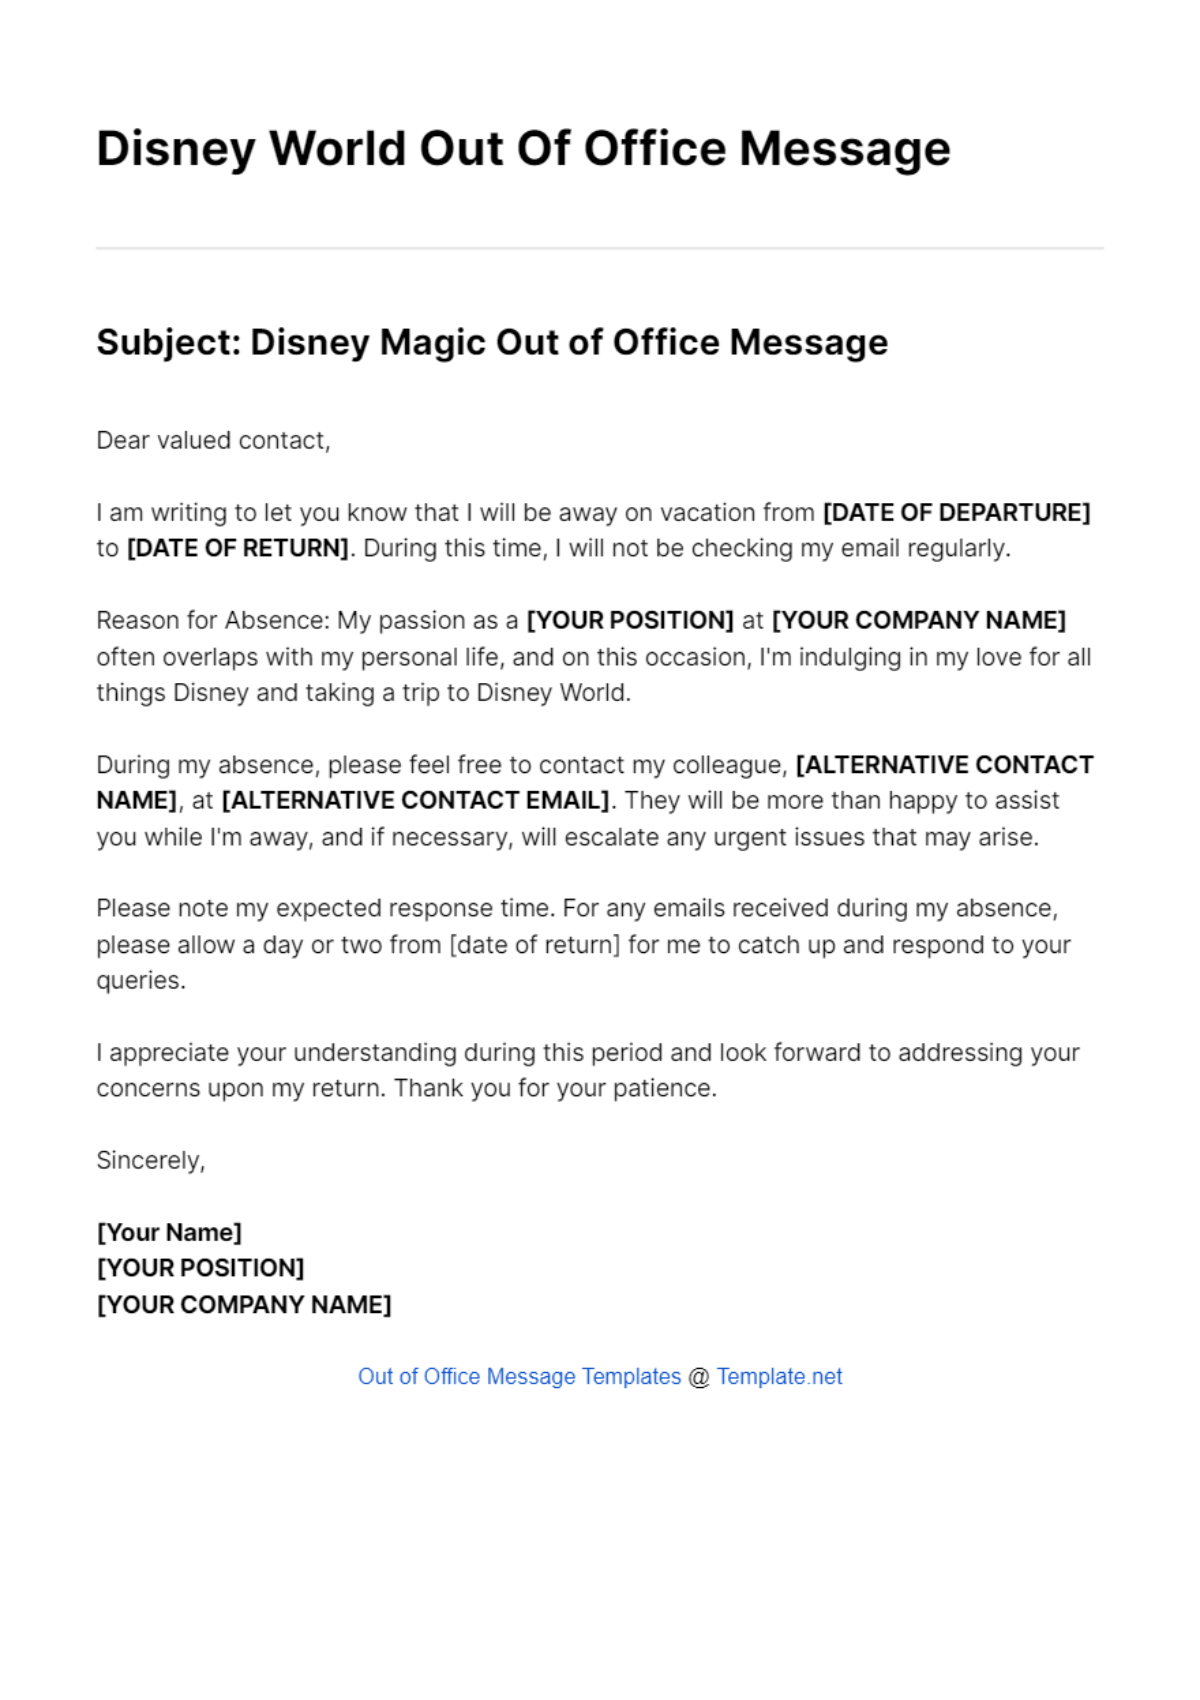 Free Disney World Out Of Office Message Template